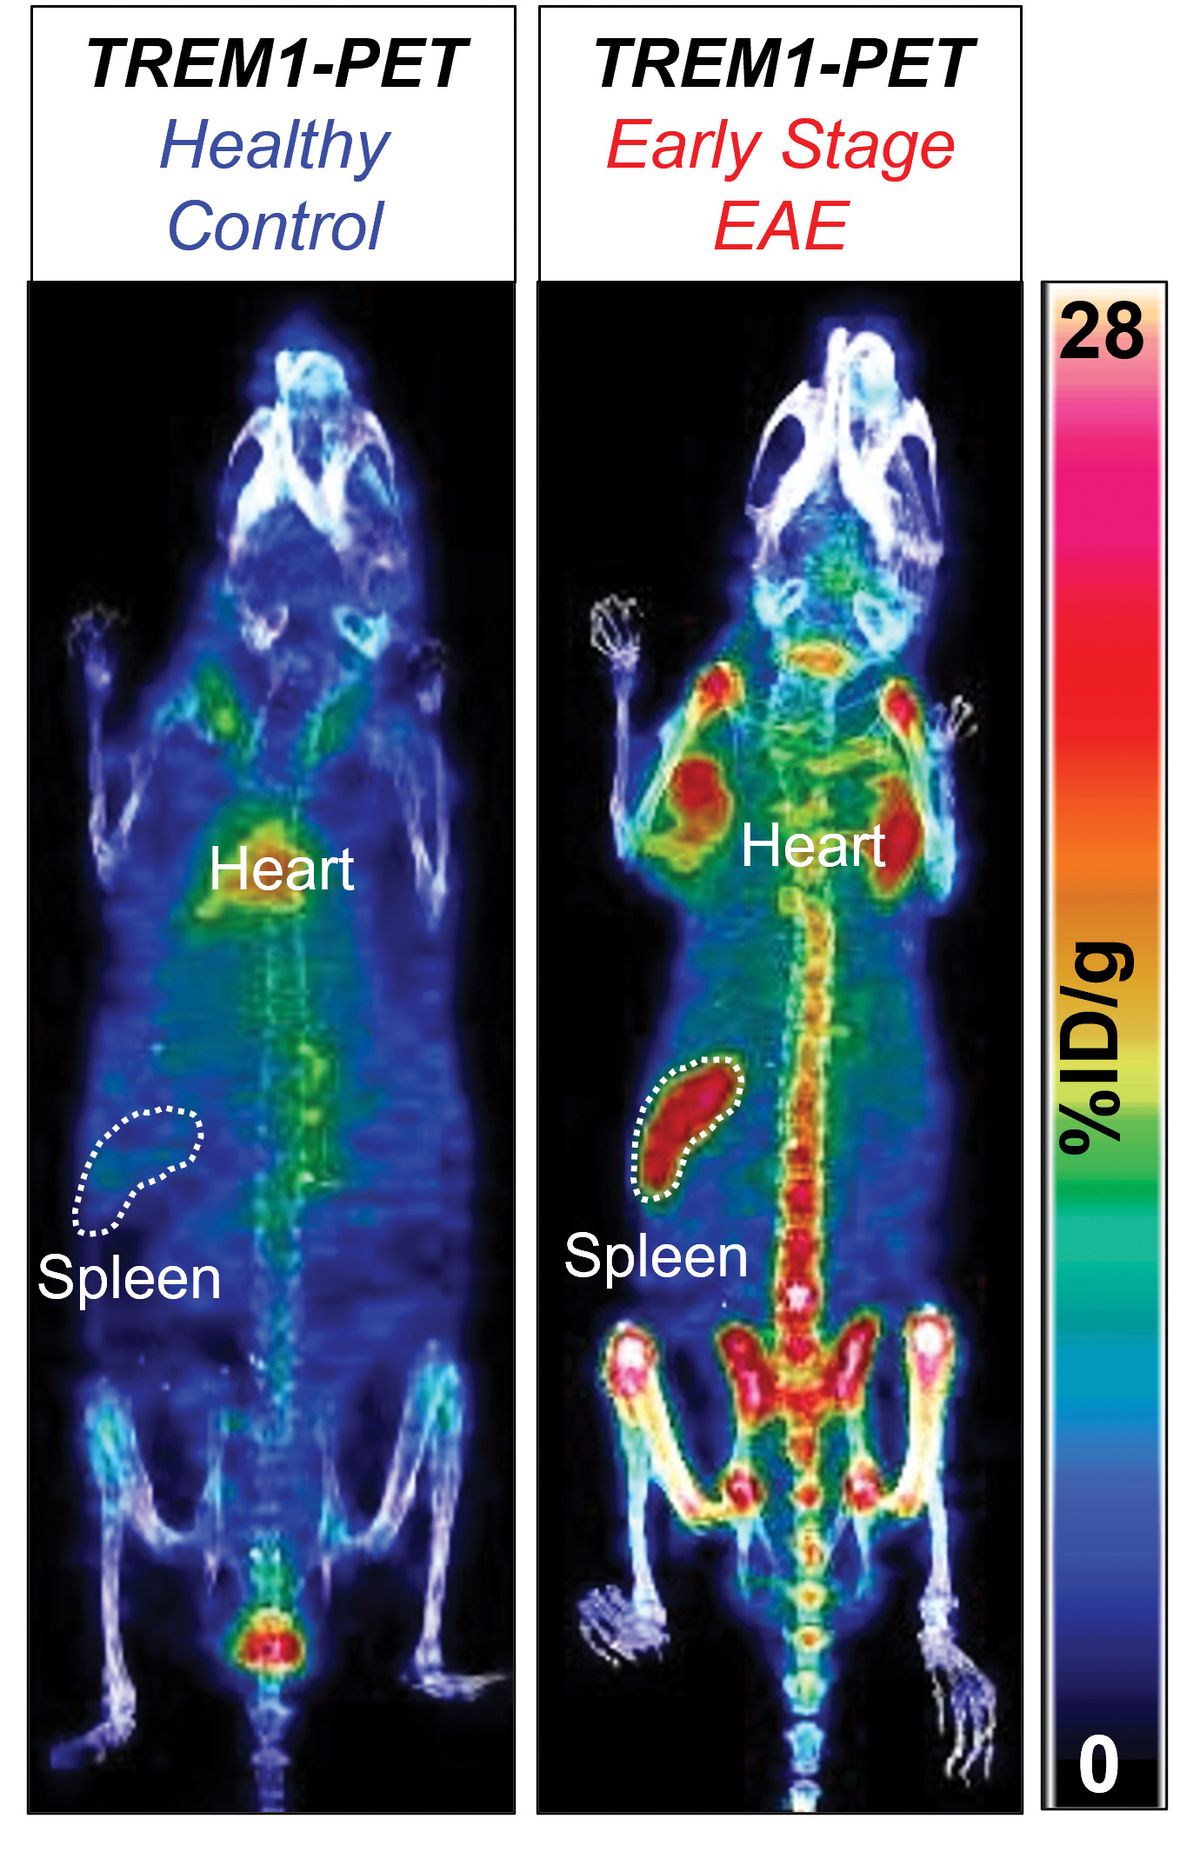 The image shows PET scanner pictures of two mice. The image of the animal on the left is mostly blue, indicating low detection of the radioactive tracer. The mouse on the right shows higher detection of the tracer as indicated by red and yellow spots throughout its body.